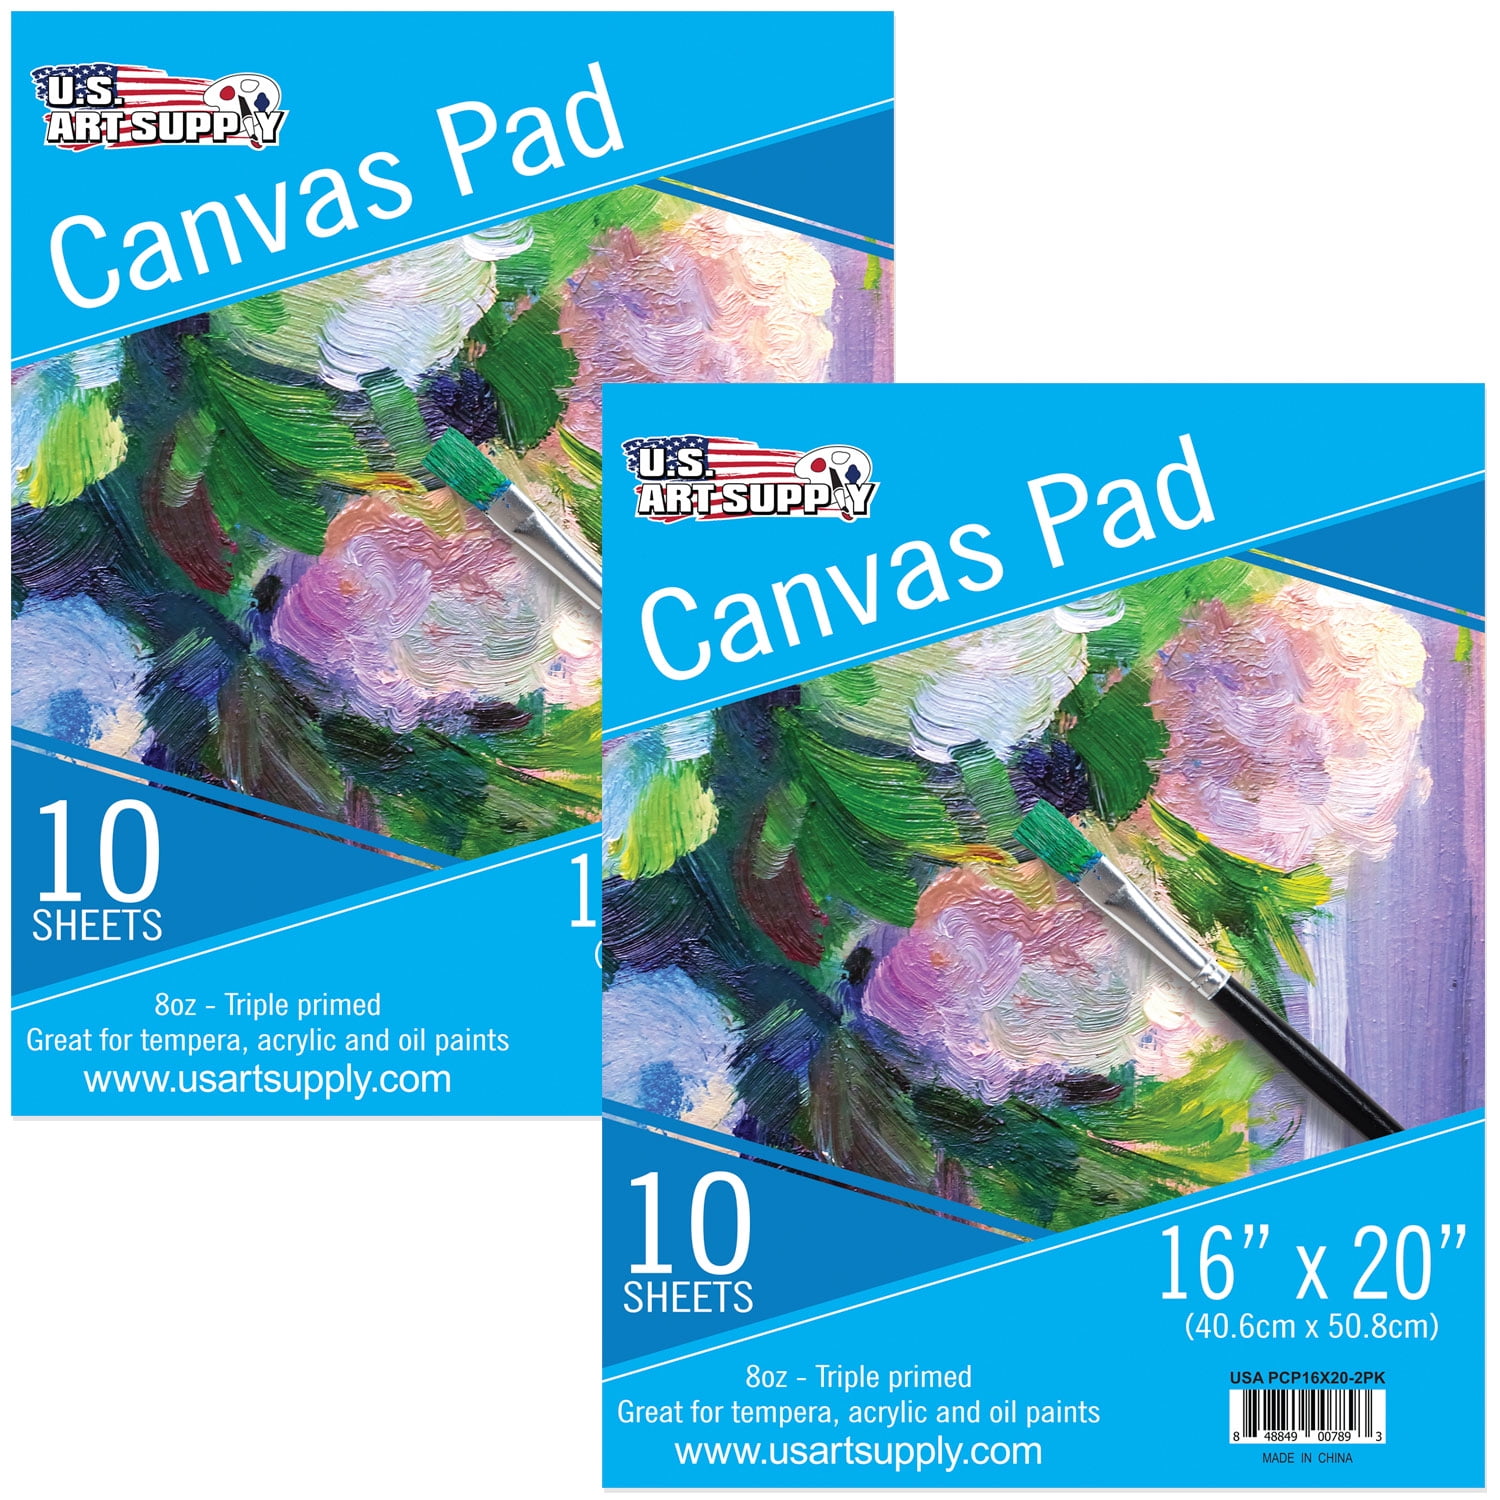 4 Packs: 6 ct. (24 total) 12 x 16 Super Value Canvas by Artist's